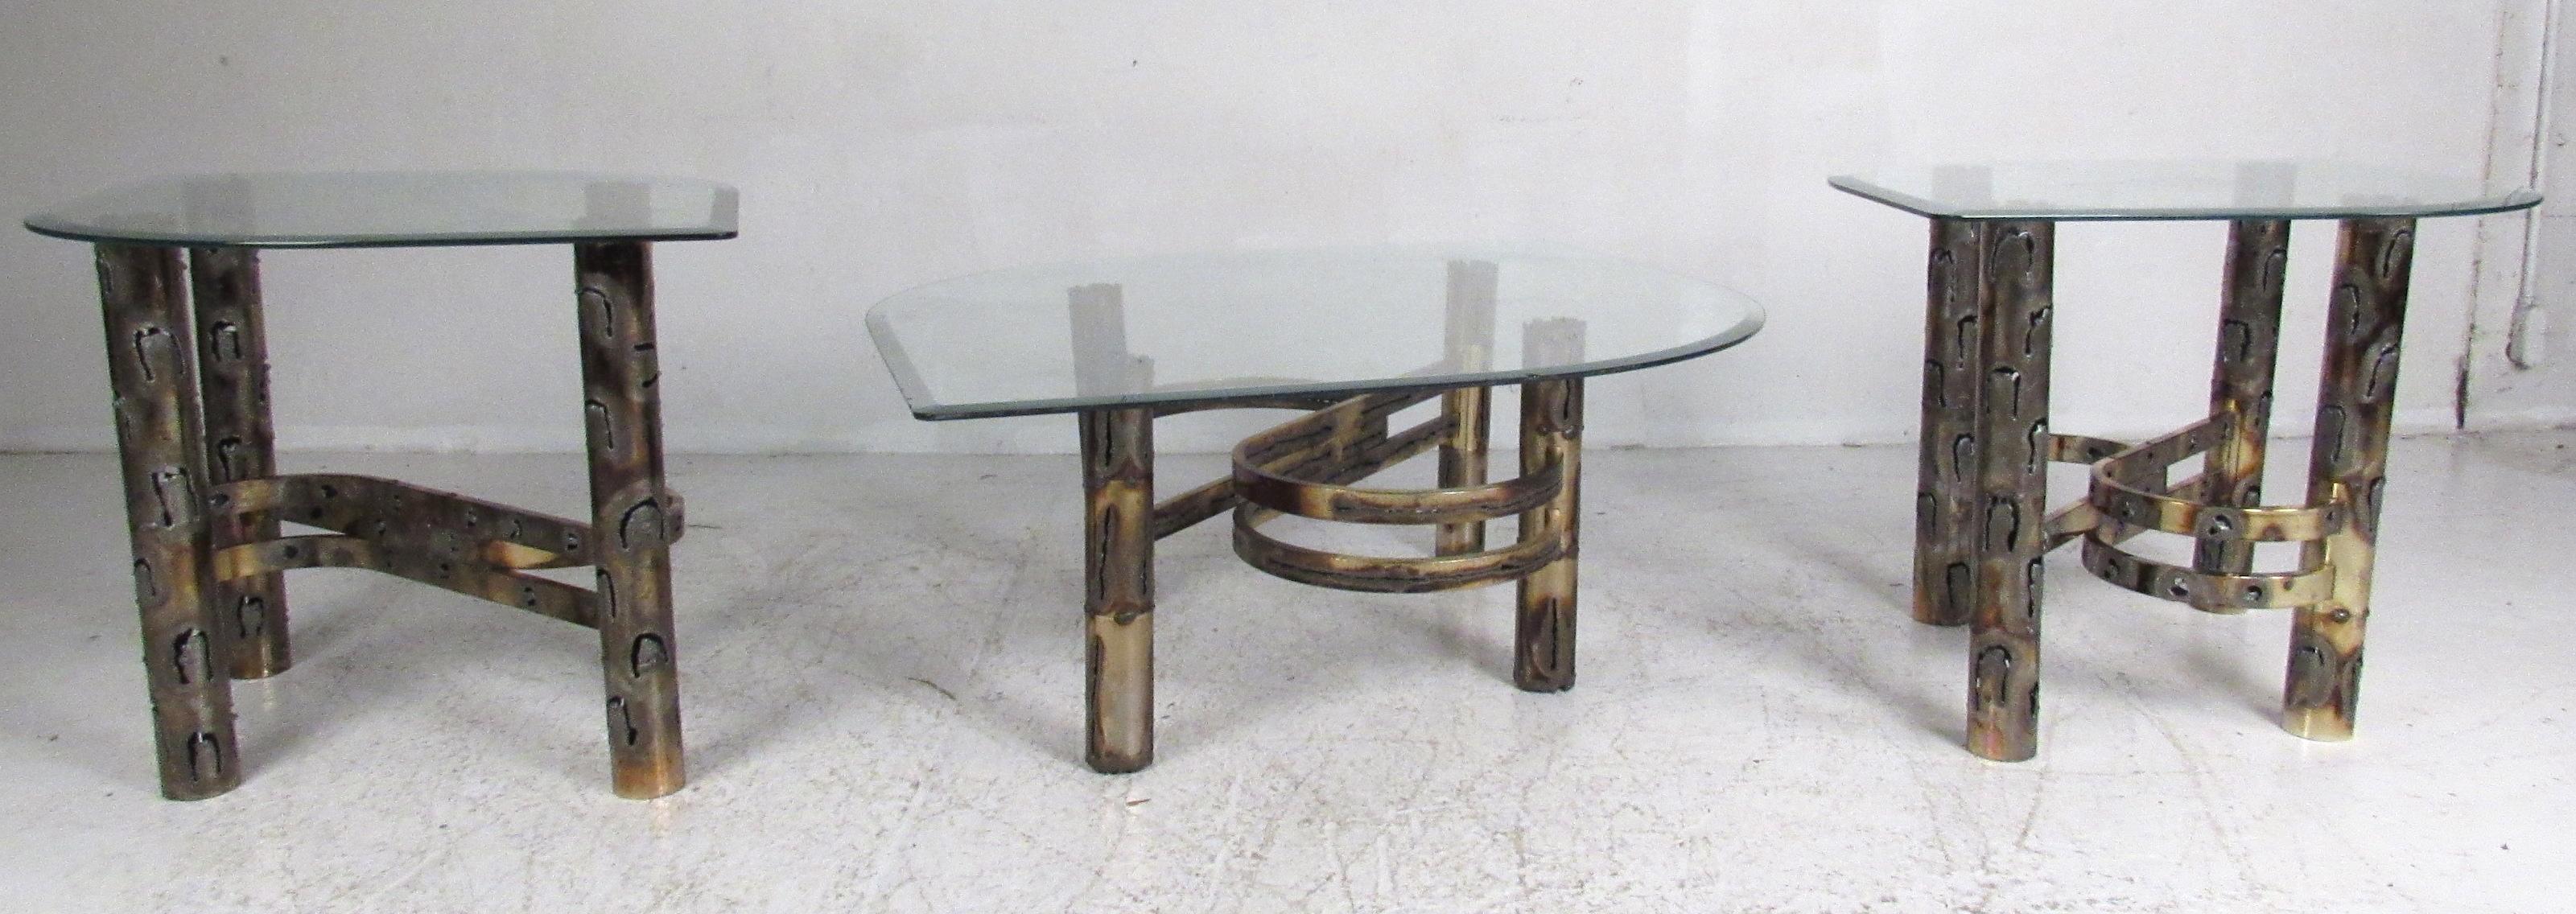 American Brutalist Torch Cut Brass Table Set with Glass Tops For Sale